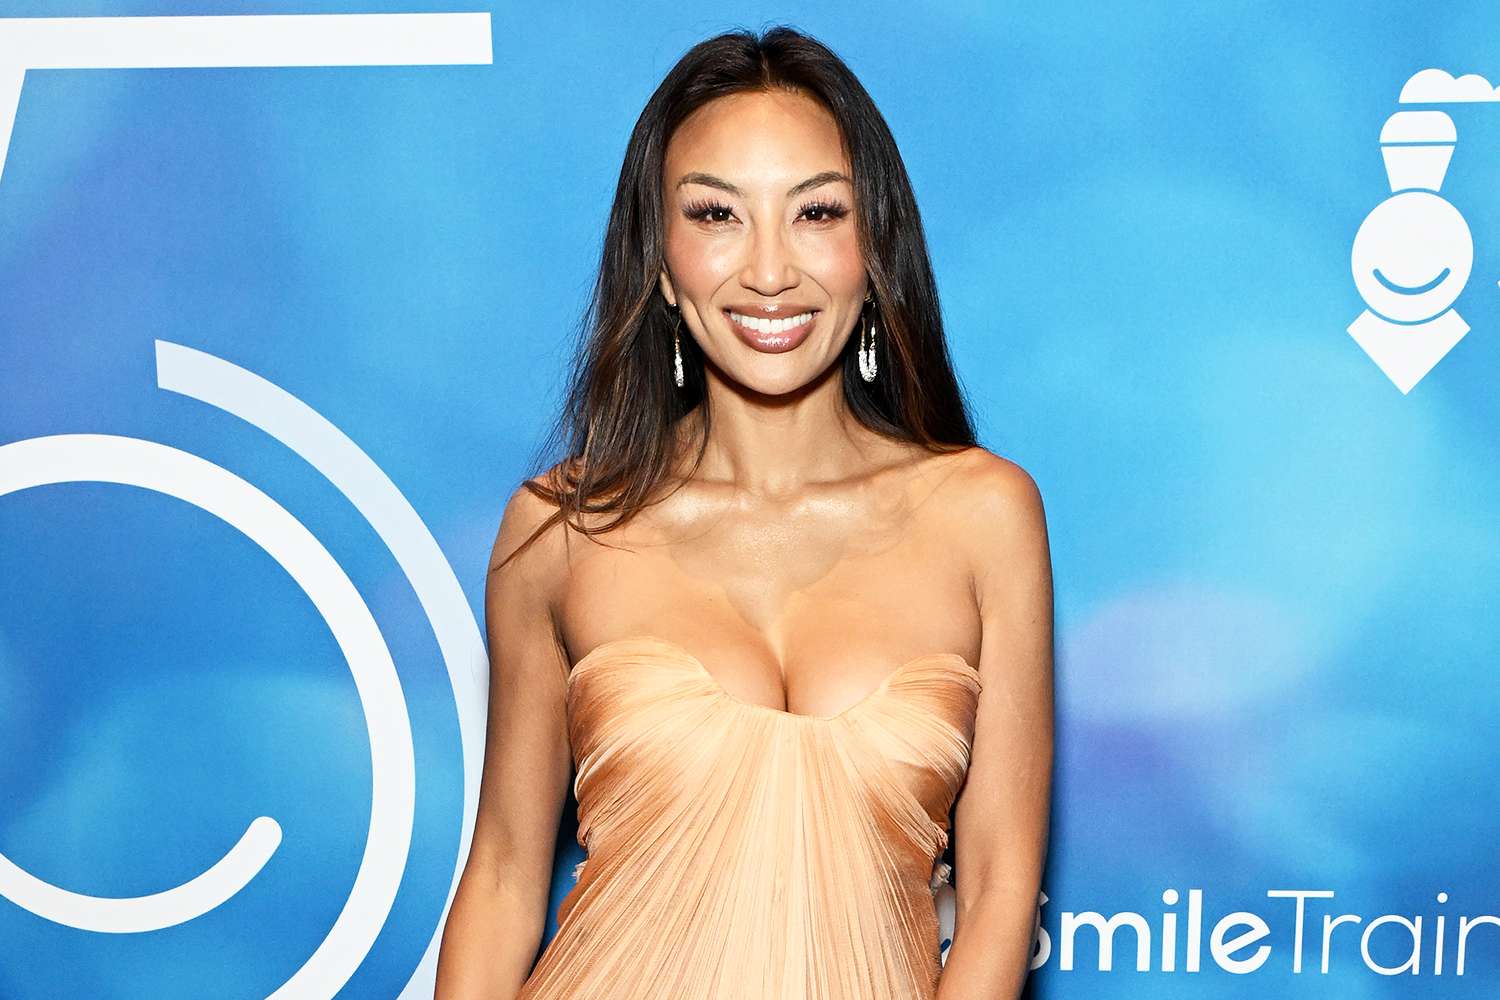 Jeannie Mai Steps Out to Support 'Incredible' Cause amid Ongoing Divorce from Ex Jeezy